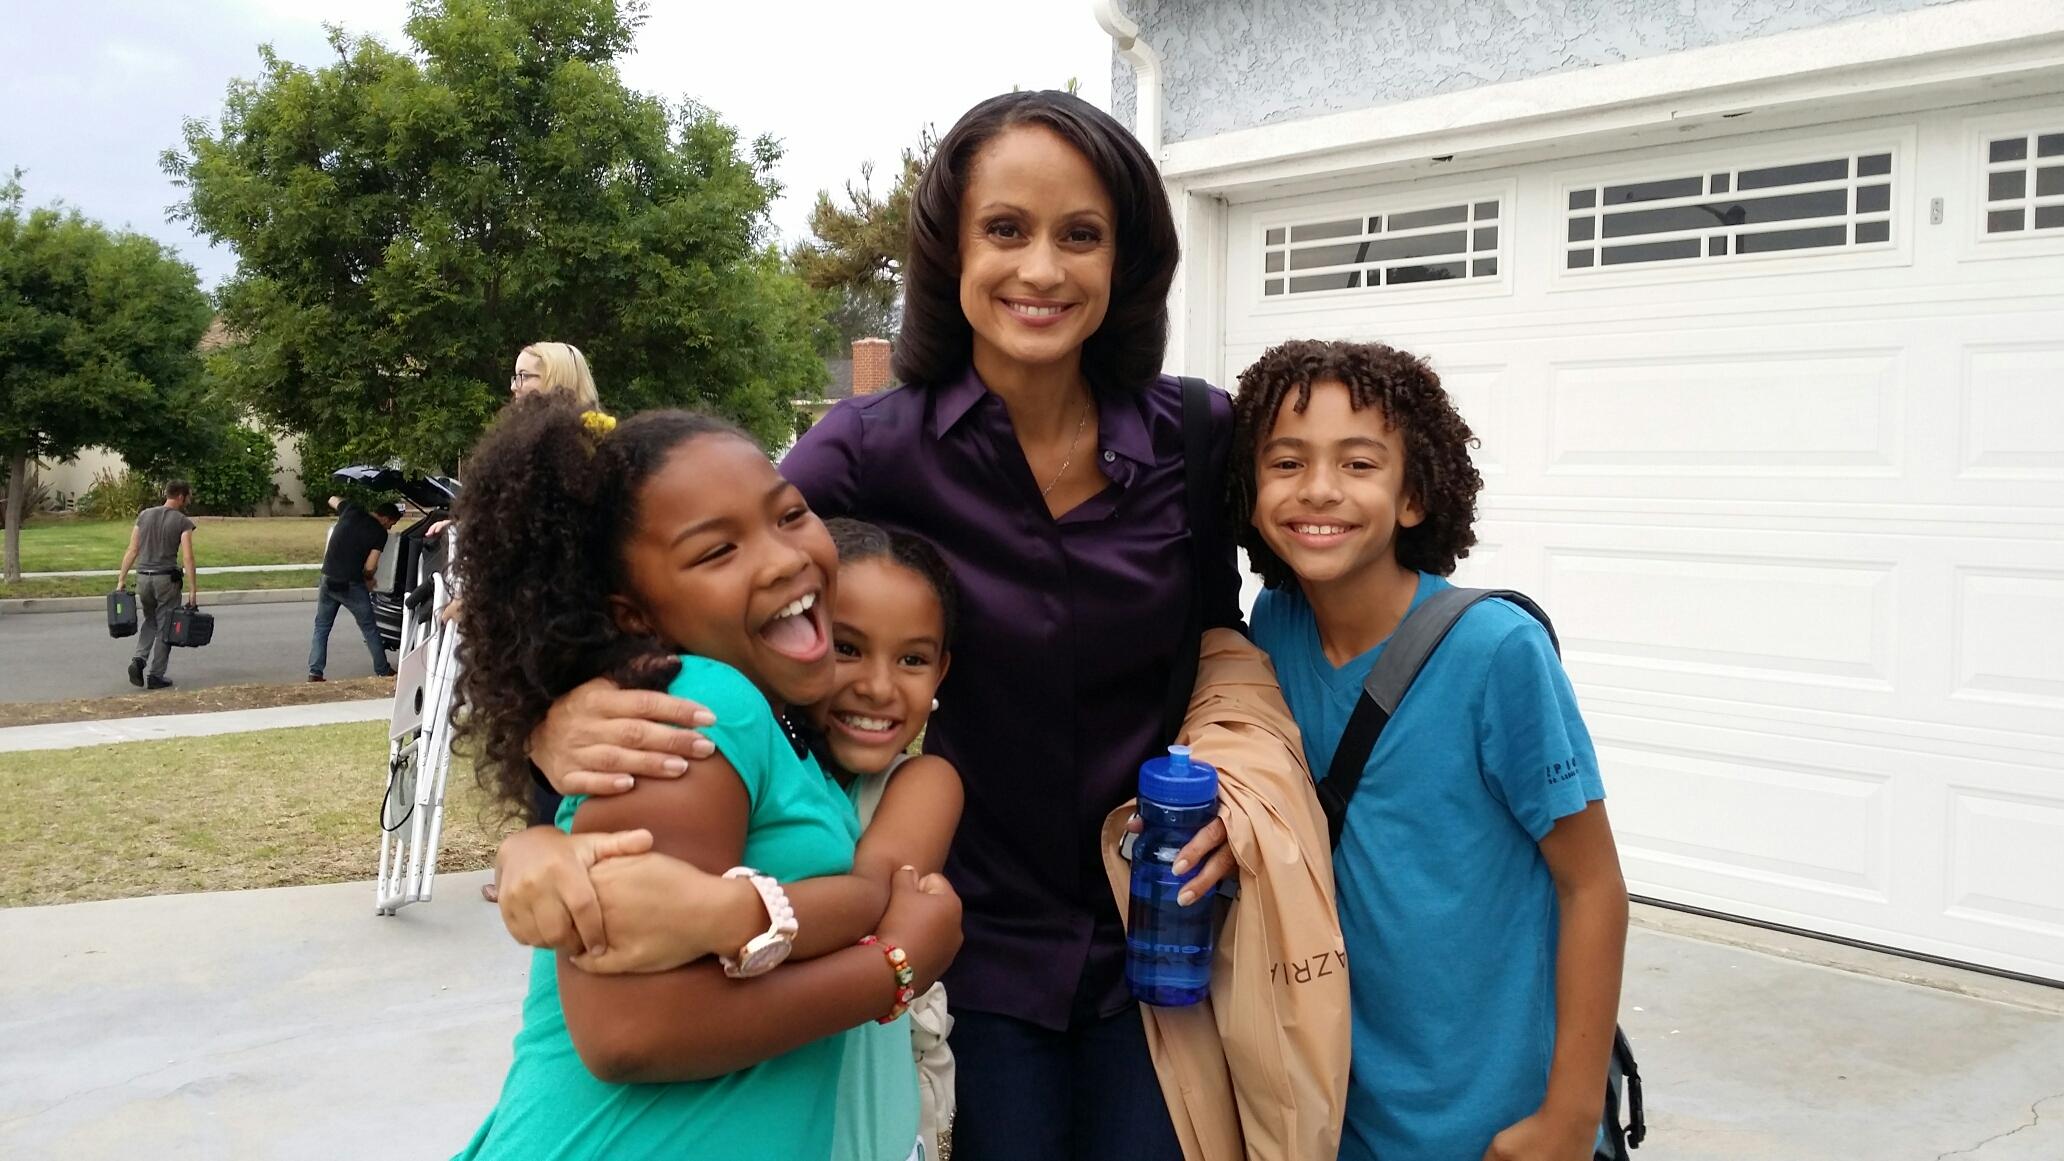 Jaden Betts on Sister Code with Anne-Marie Johnson, Sade Kimora Young and Laya DeLeon Hayes